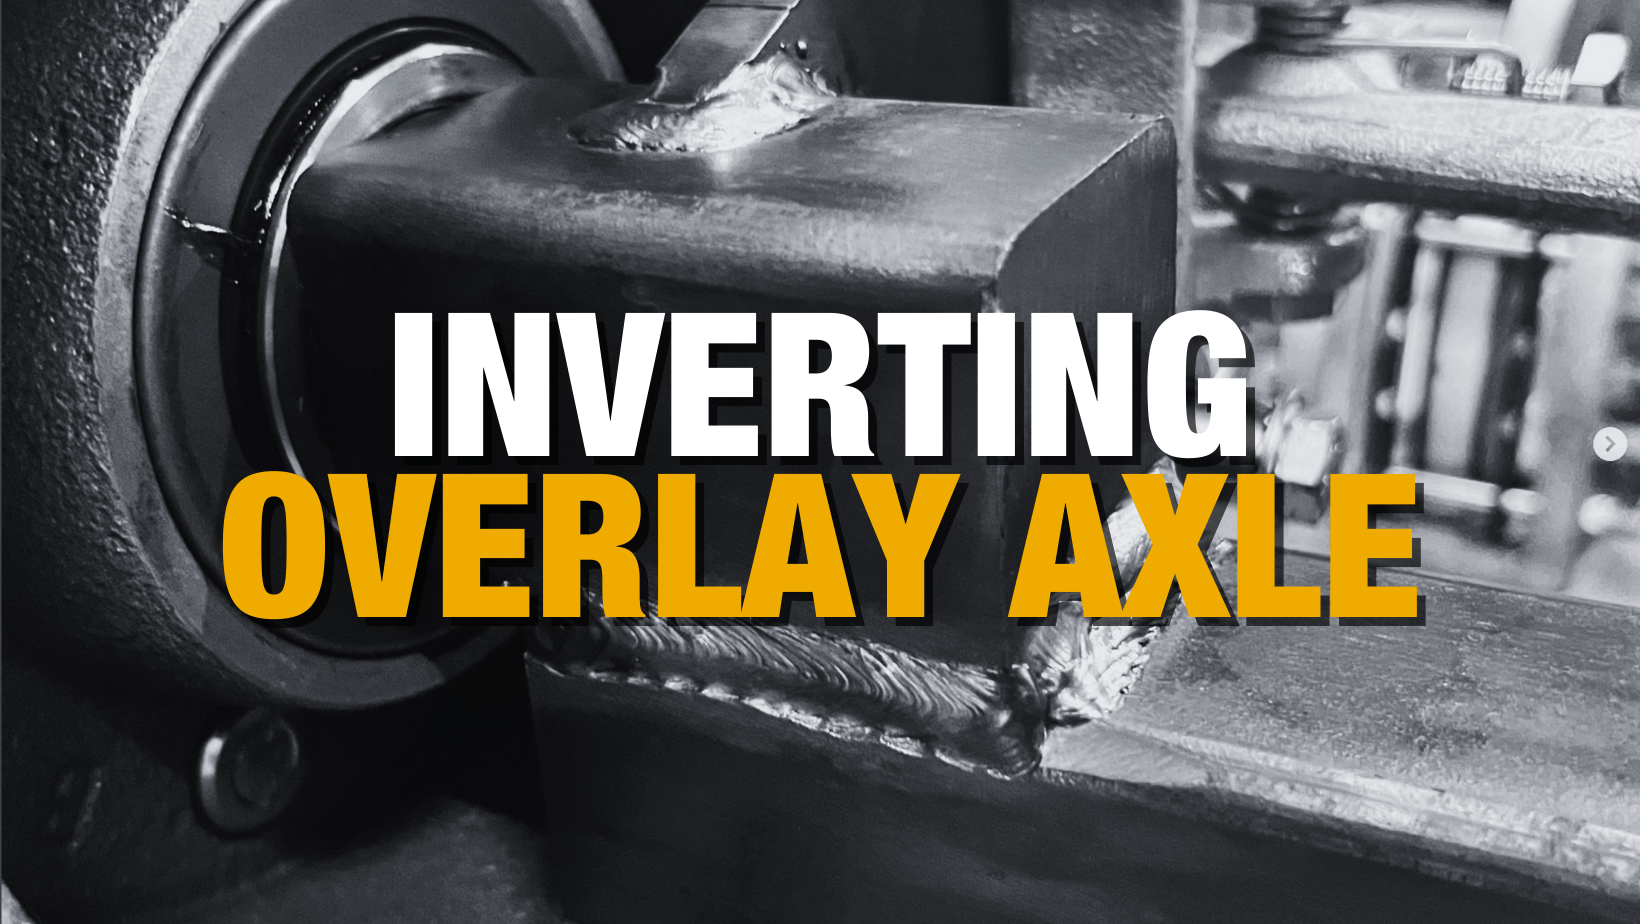 Inverting Overlay Axles Safely for Trailers & Caravans